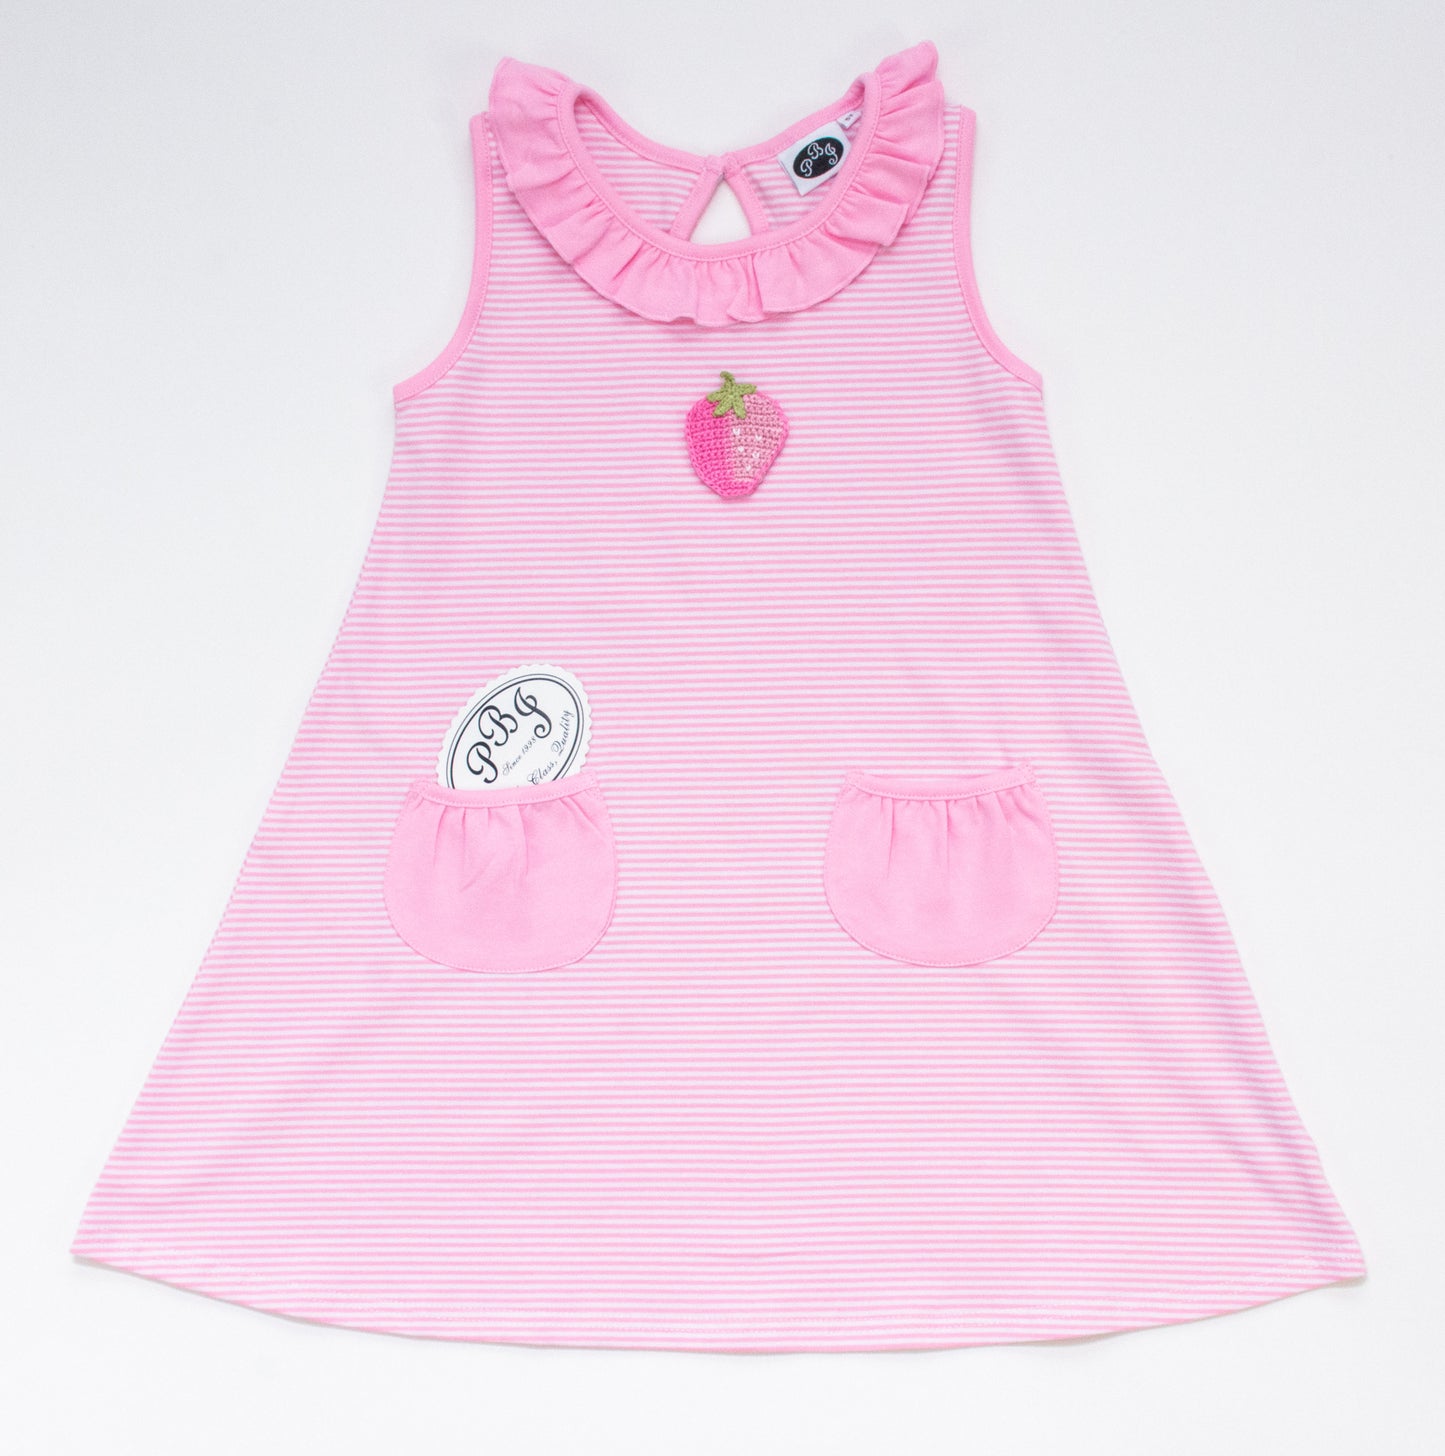 Swing dress sleeveless with pockets - Pink*